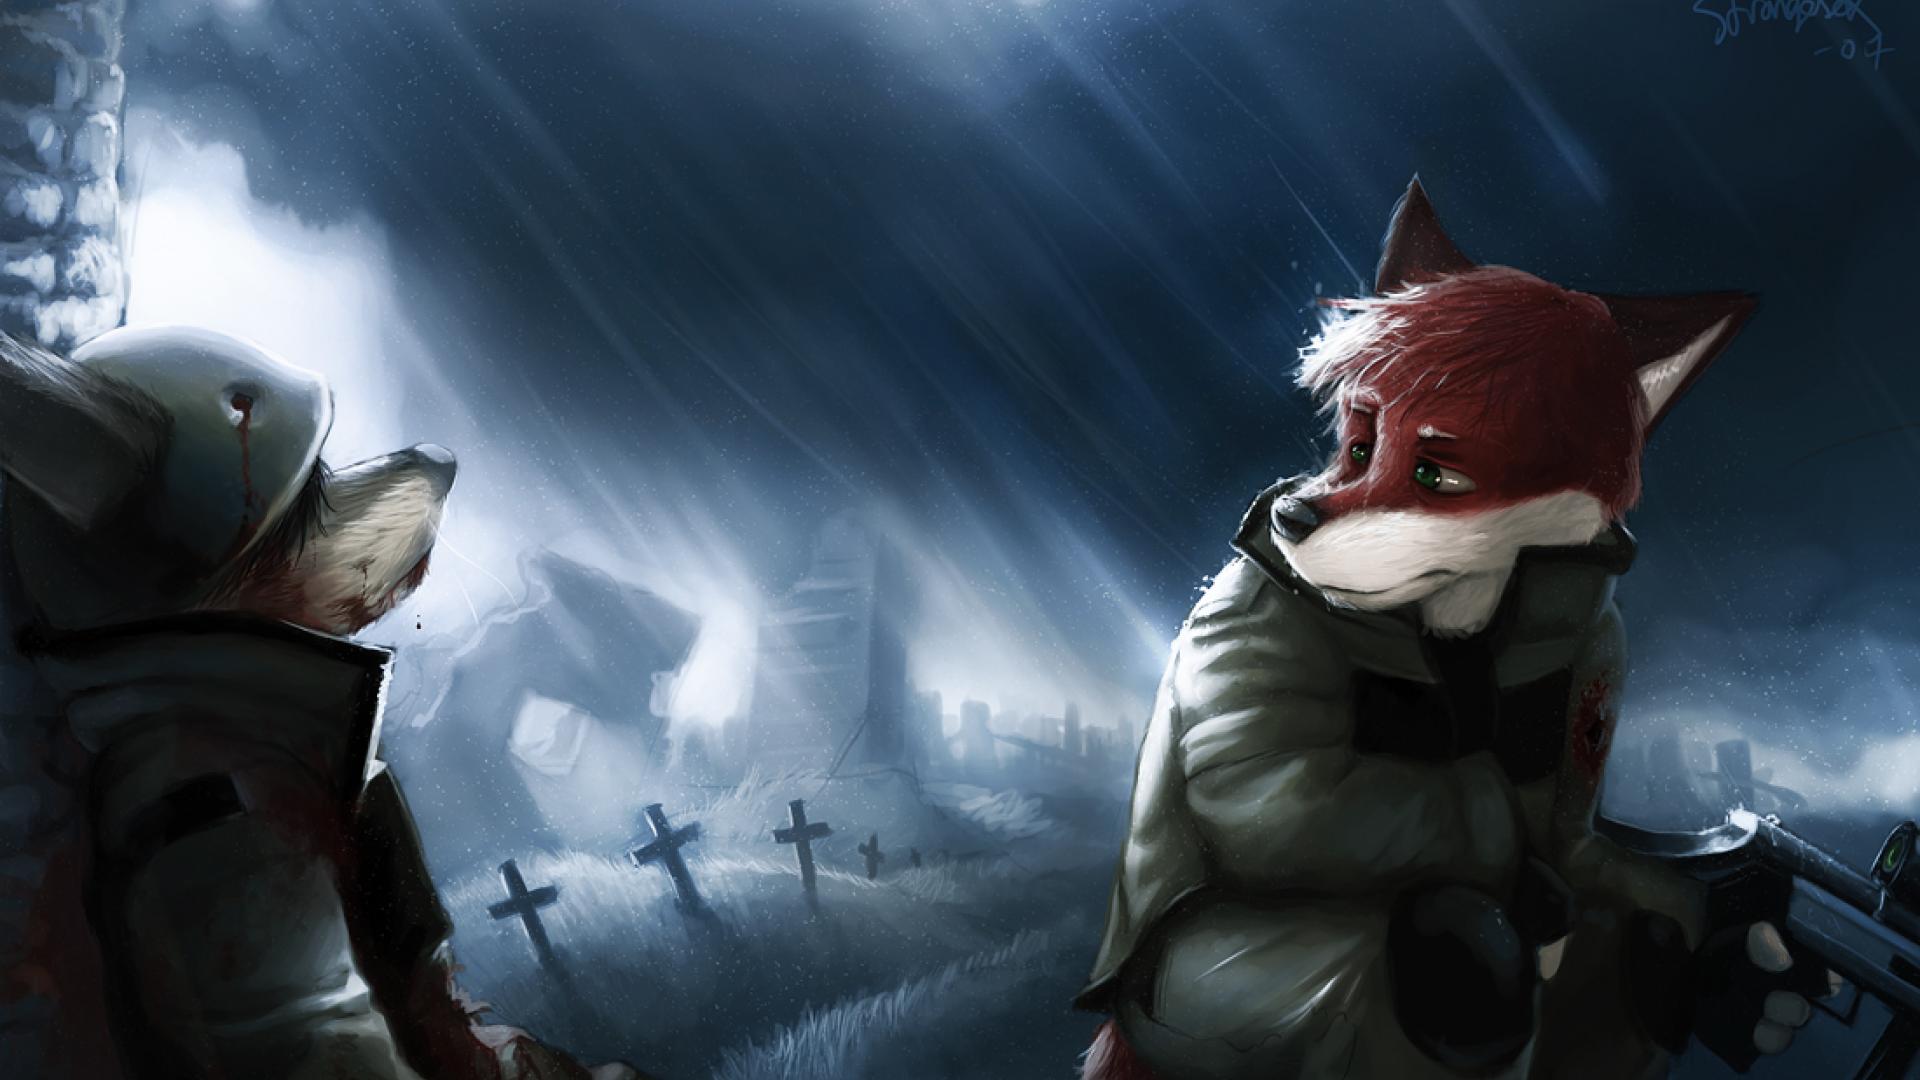 Furry wallpaper - - High Quality and Resolution